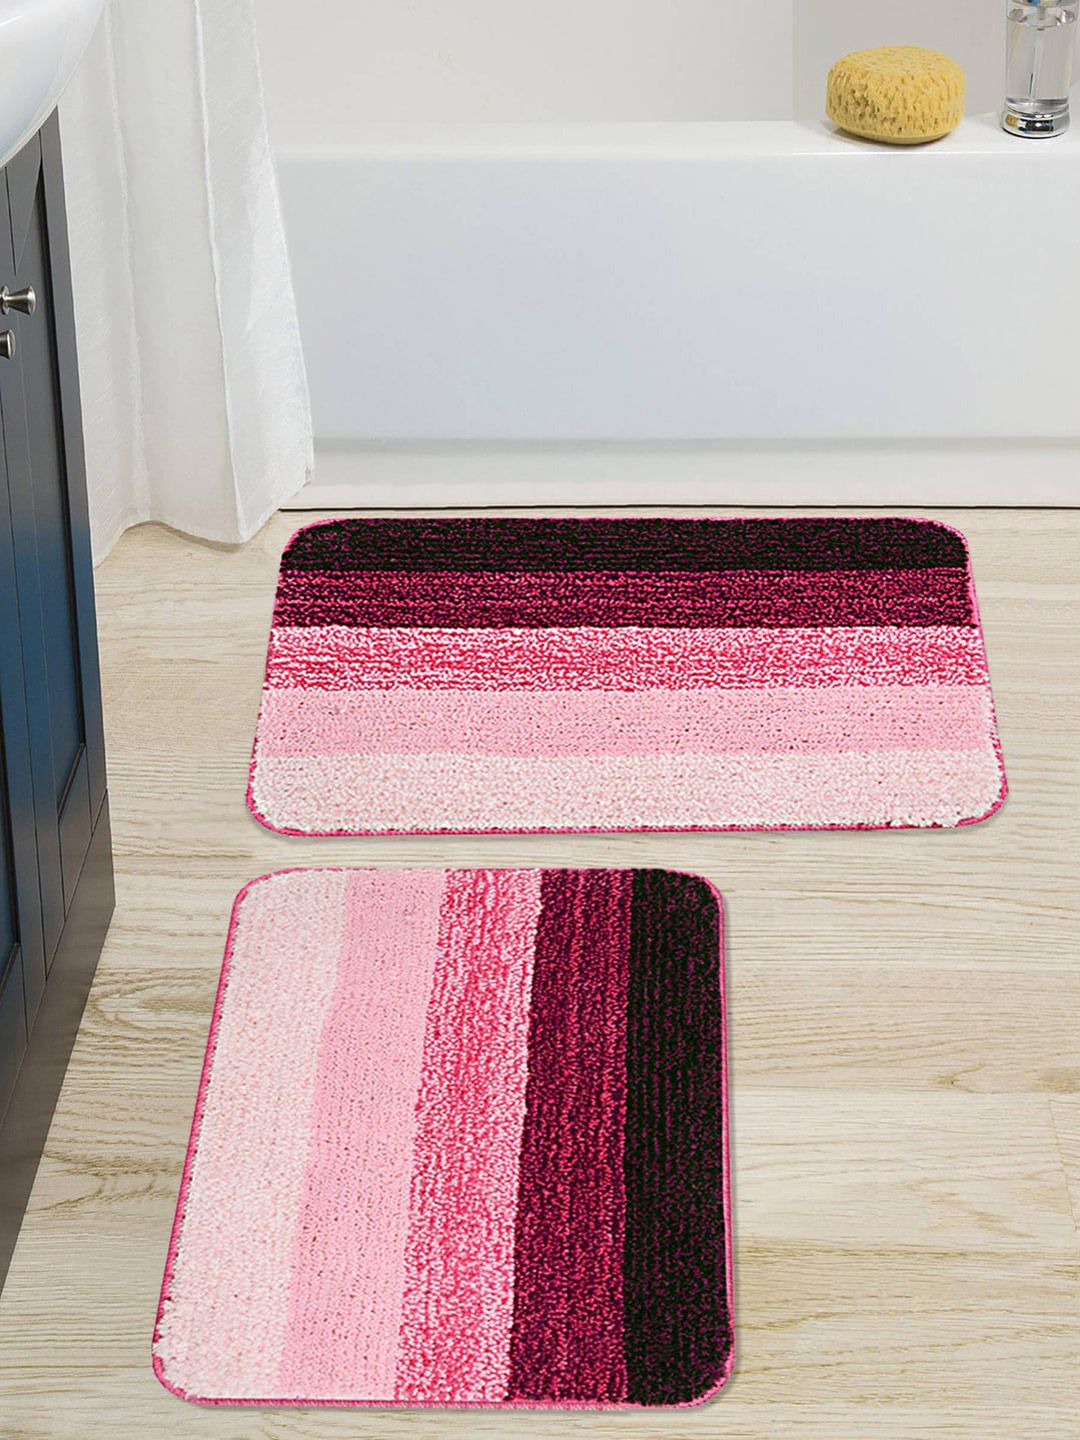 Saral Home Set Of 2 Pink & Maroon Striped Anti-Skid Bath Mats Price in India